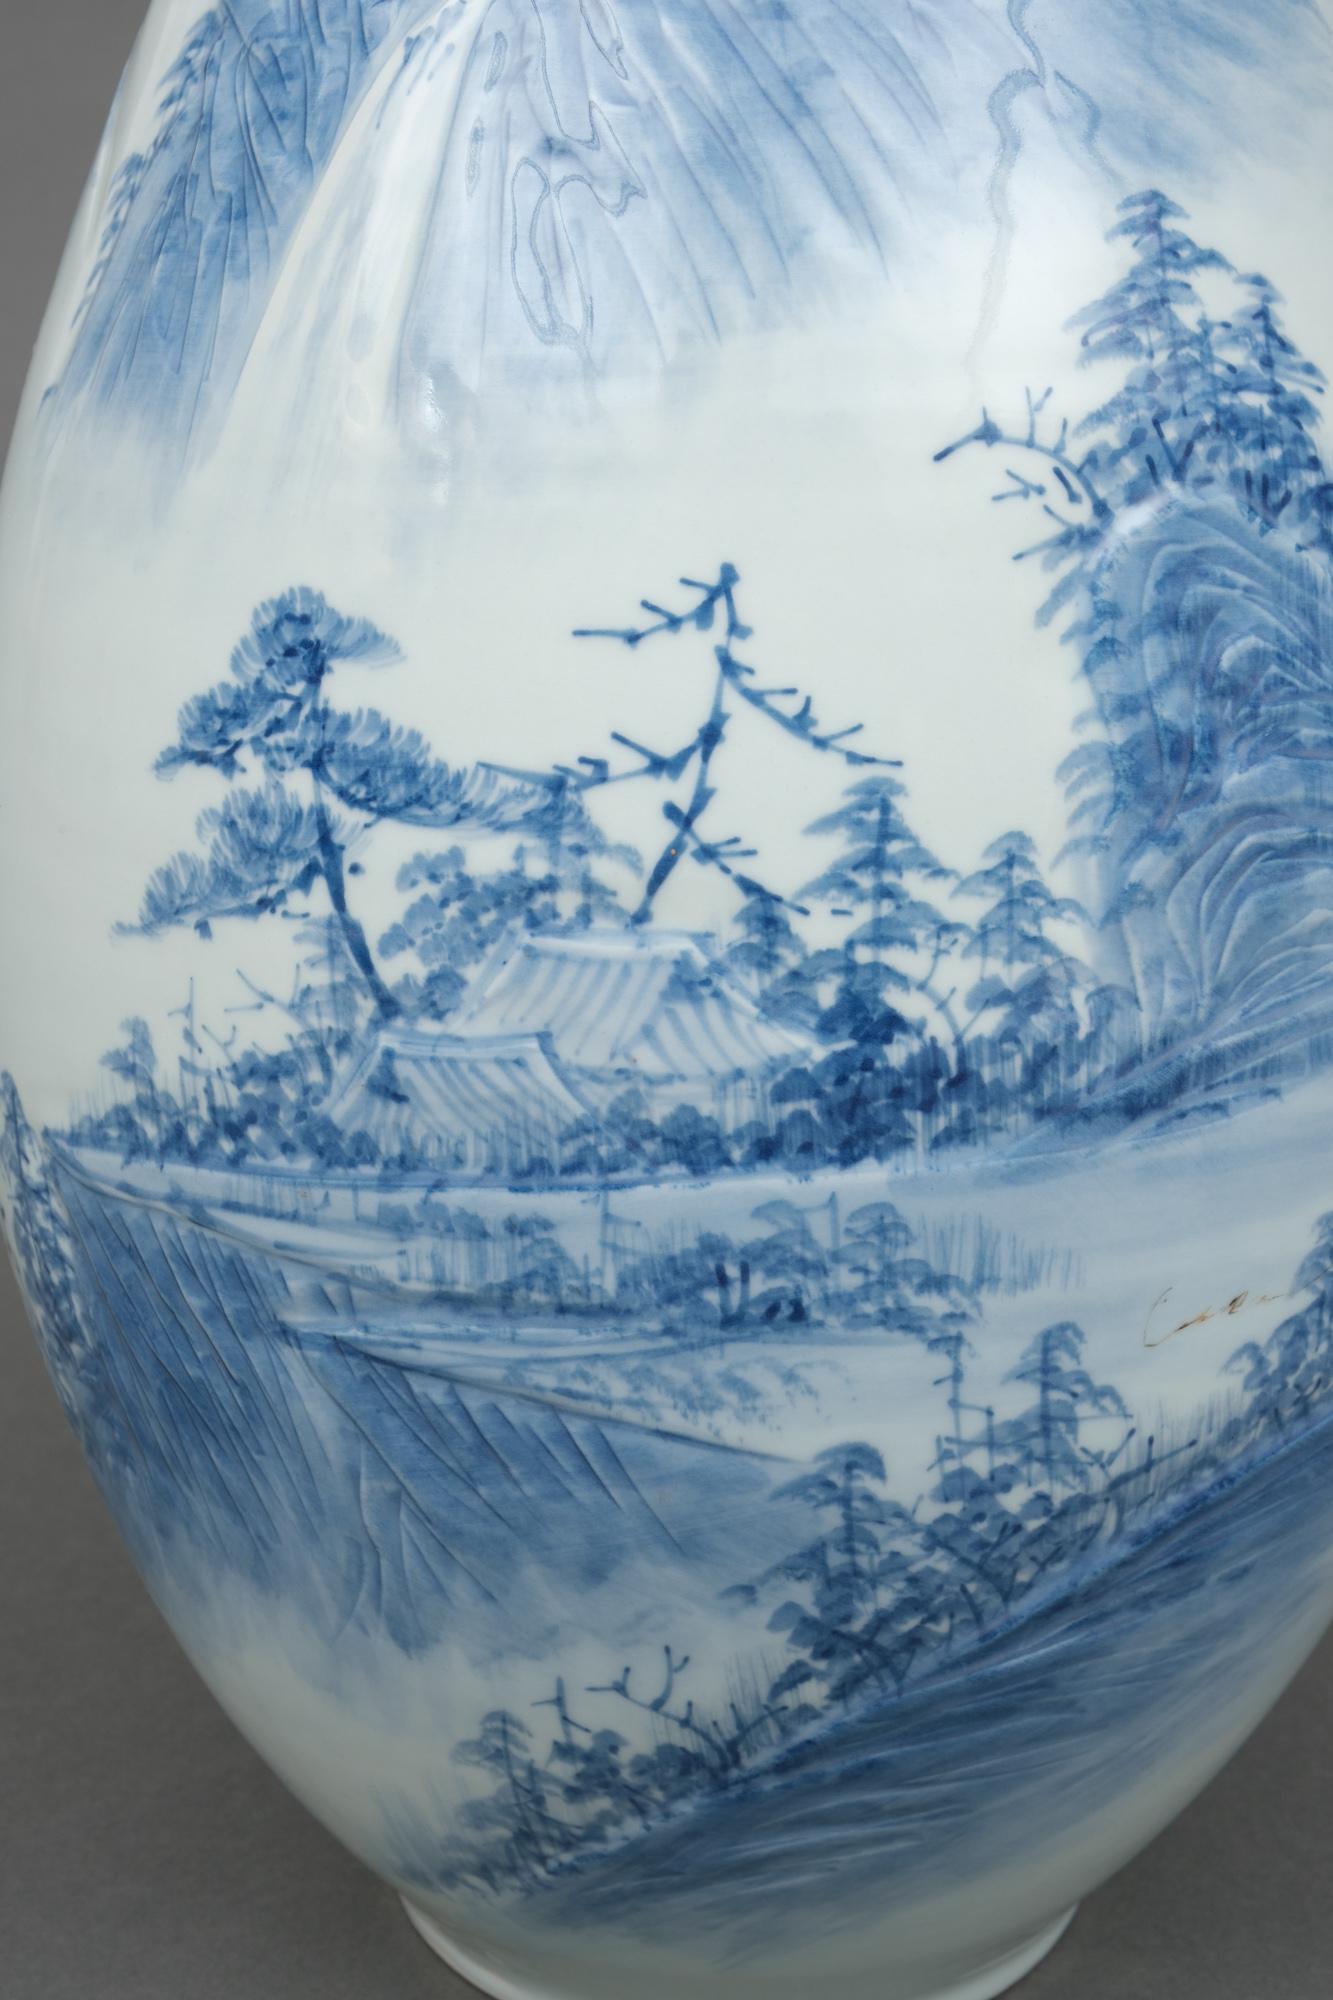 Very large ovoid shaped porcelain vase with a beautiful blue and white mountainscape design accentuated by a low relief details. The top of the vase ends in an elegant small neck.

Your eyes first fall on a cosy house with a gabled roof on the edge